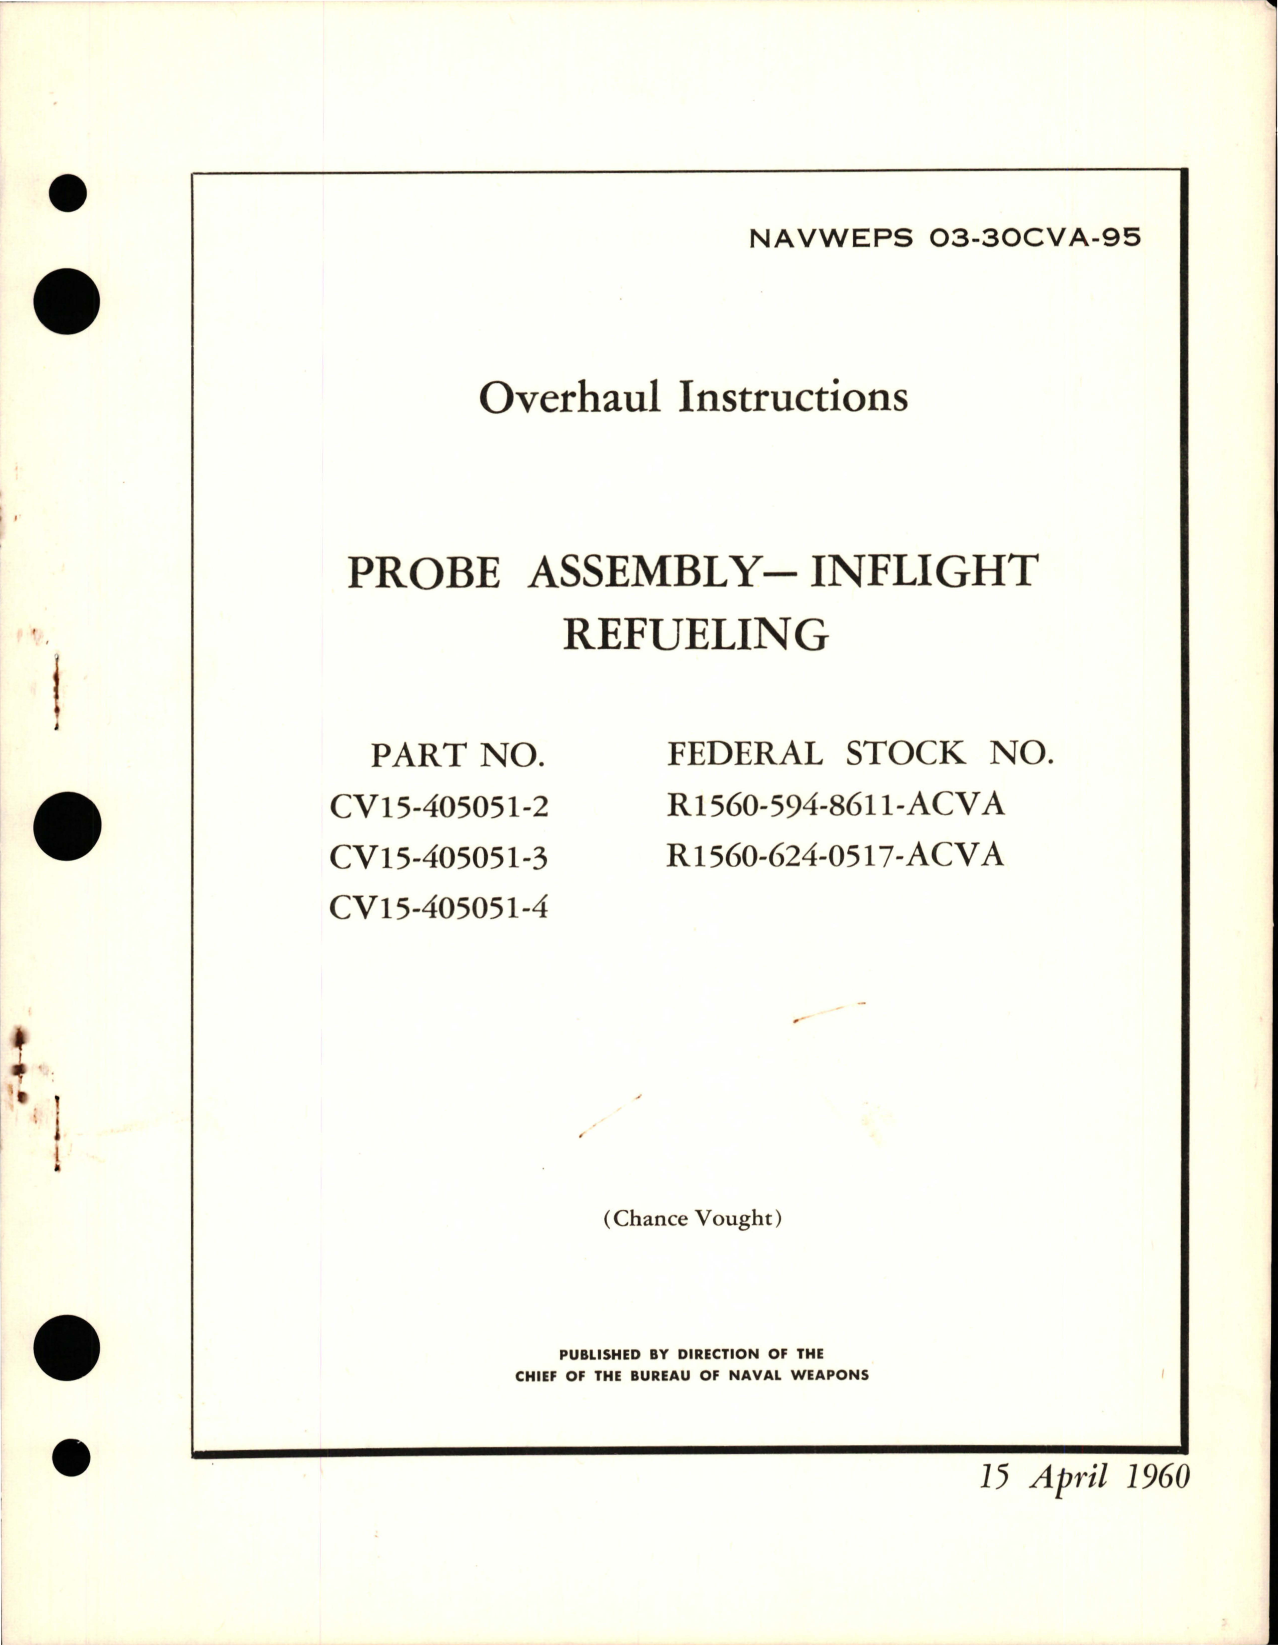 Sample page 1 from AirCorps Library document: Overhaul Instructions for Inflight Refueling Probe Assembly